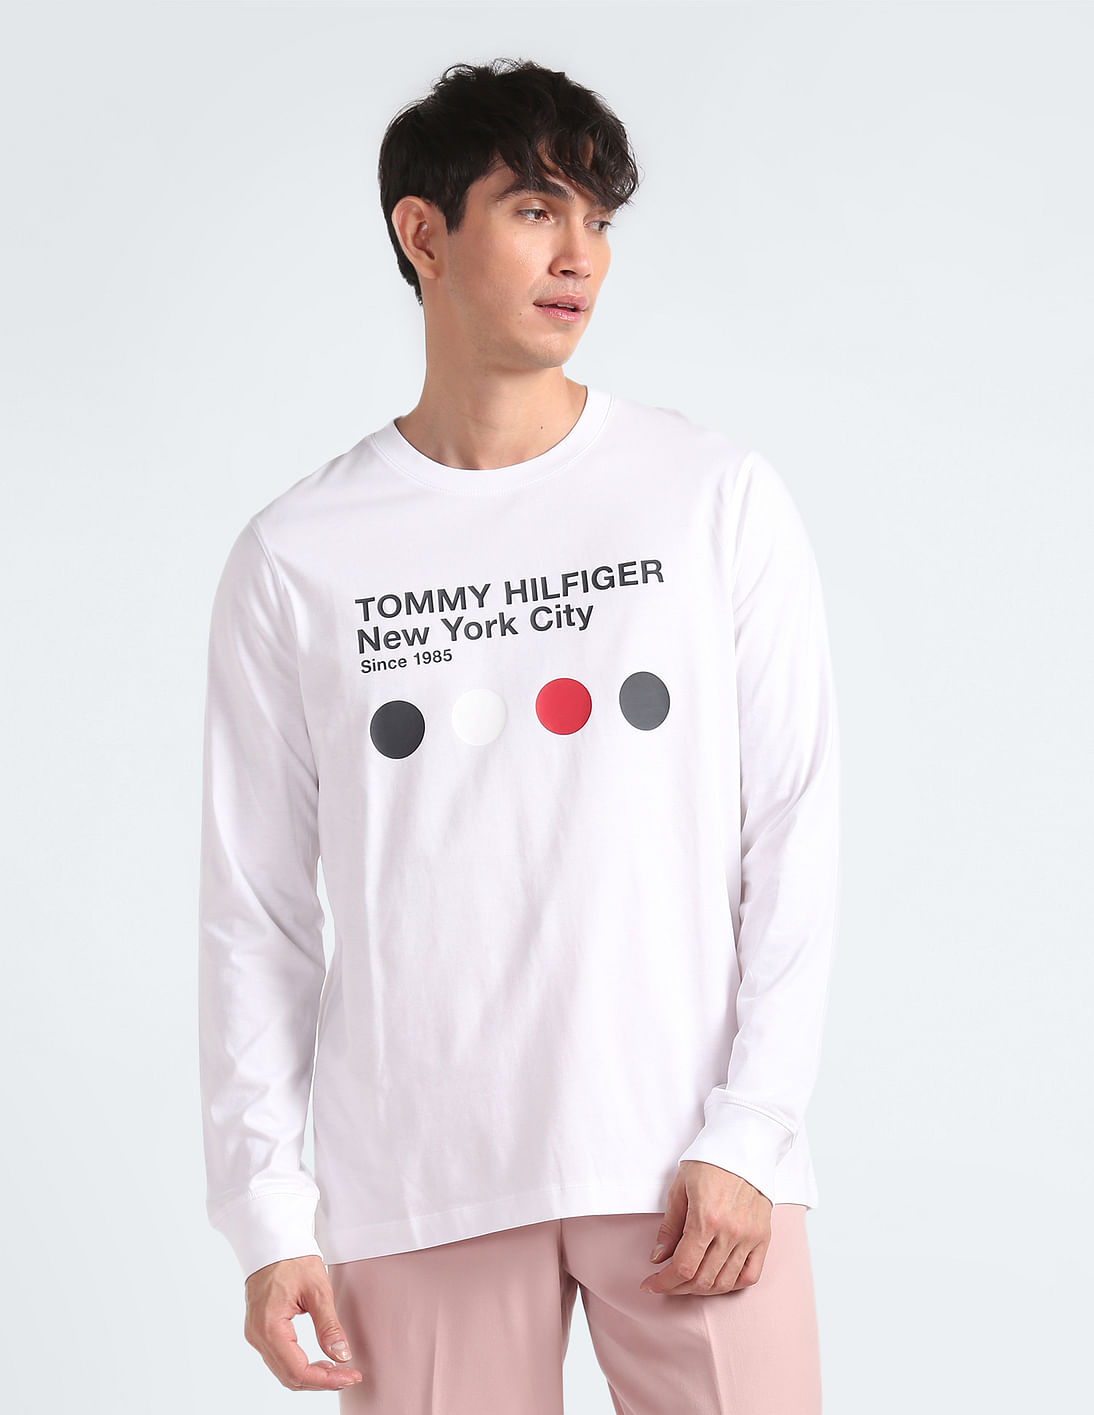 Hilfiger Buy T-Shirt Print Long Tommy Typographic Sleeve